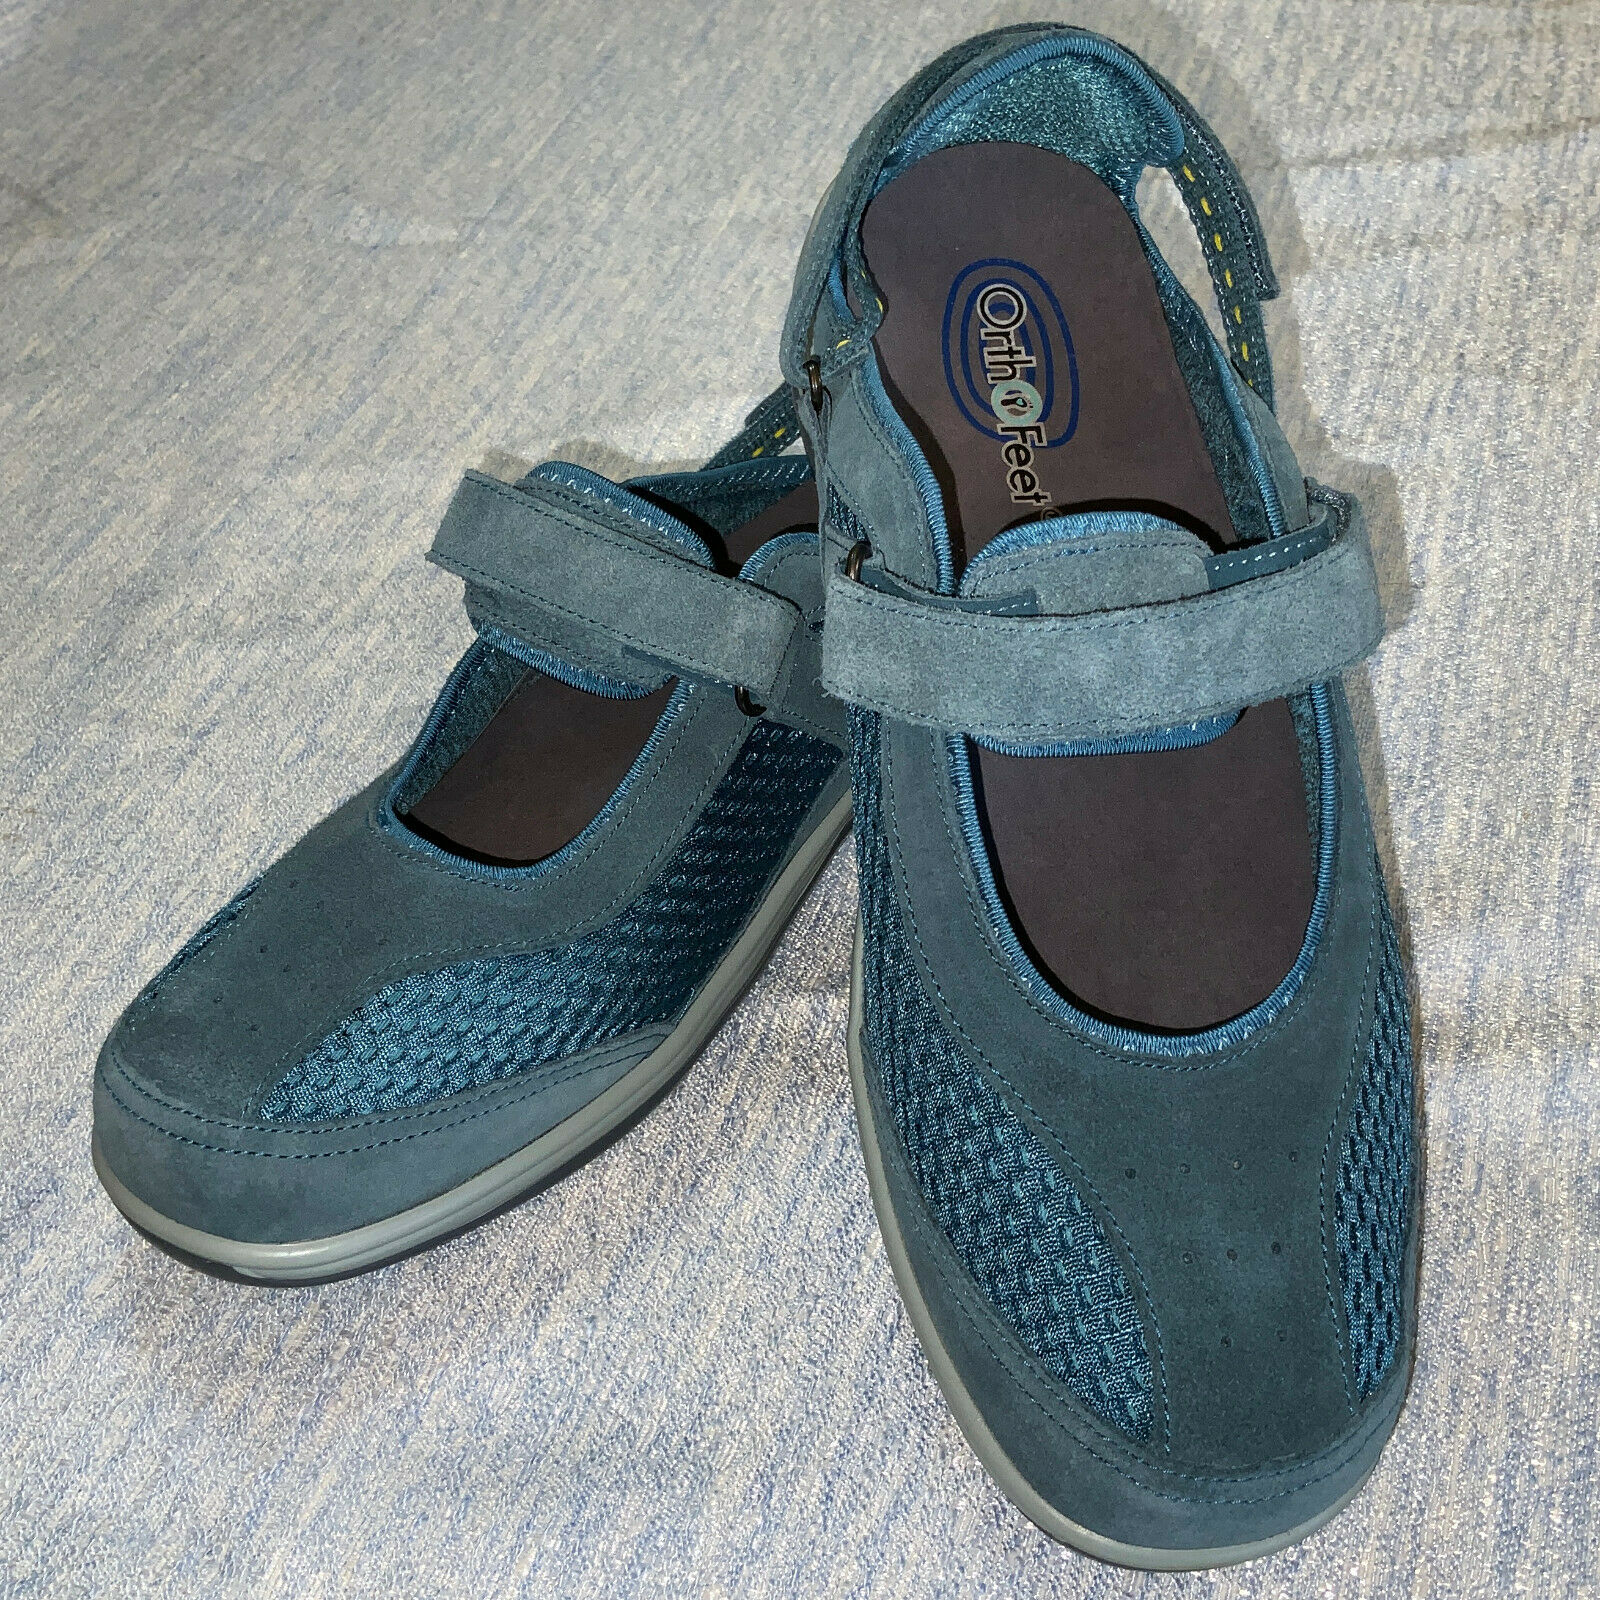 Size 10 X-Wide EE Teal Suede ORTHOFEET MARY JANES SANDALS DIABETIC Shoes 2E